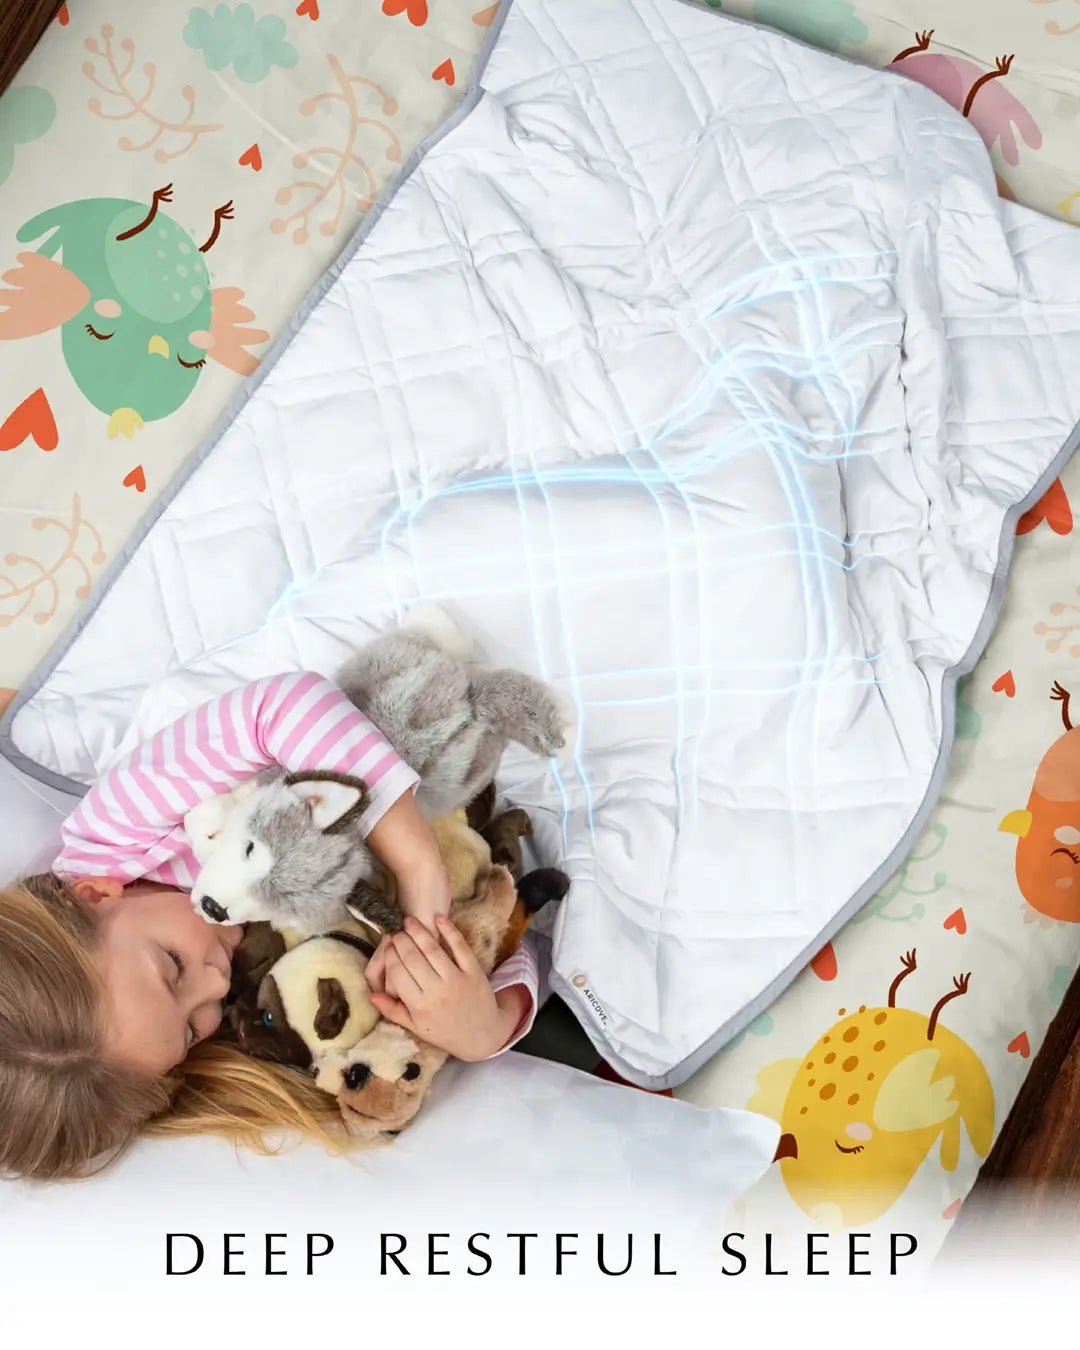 kids weighted blanket gets you deep restful sleep#weight_36-x48-5lb